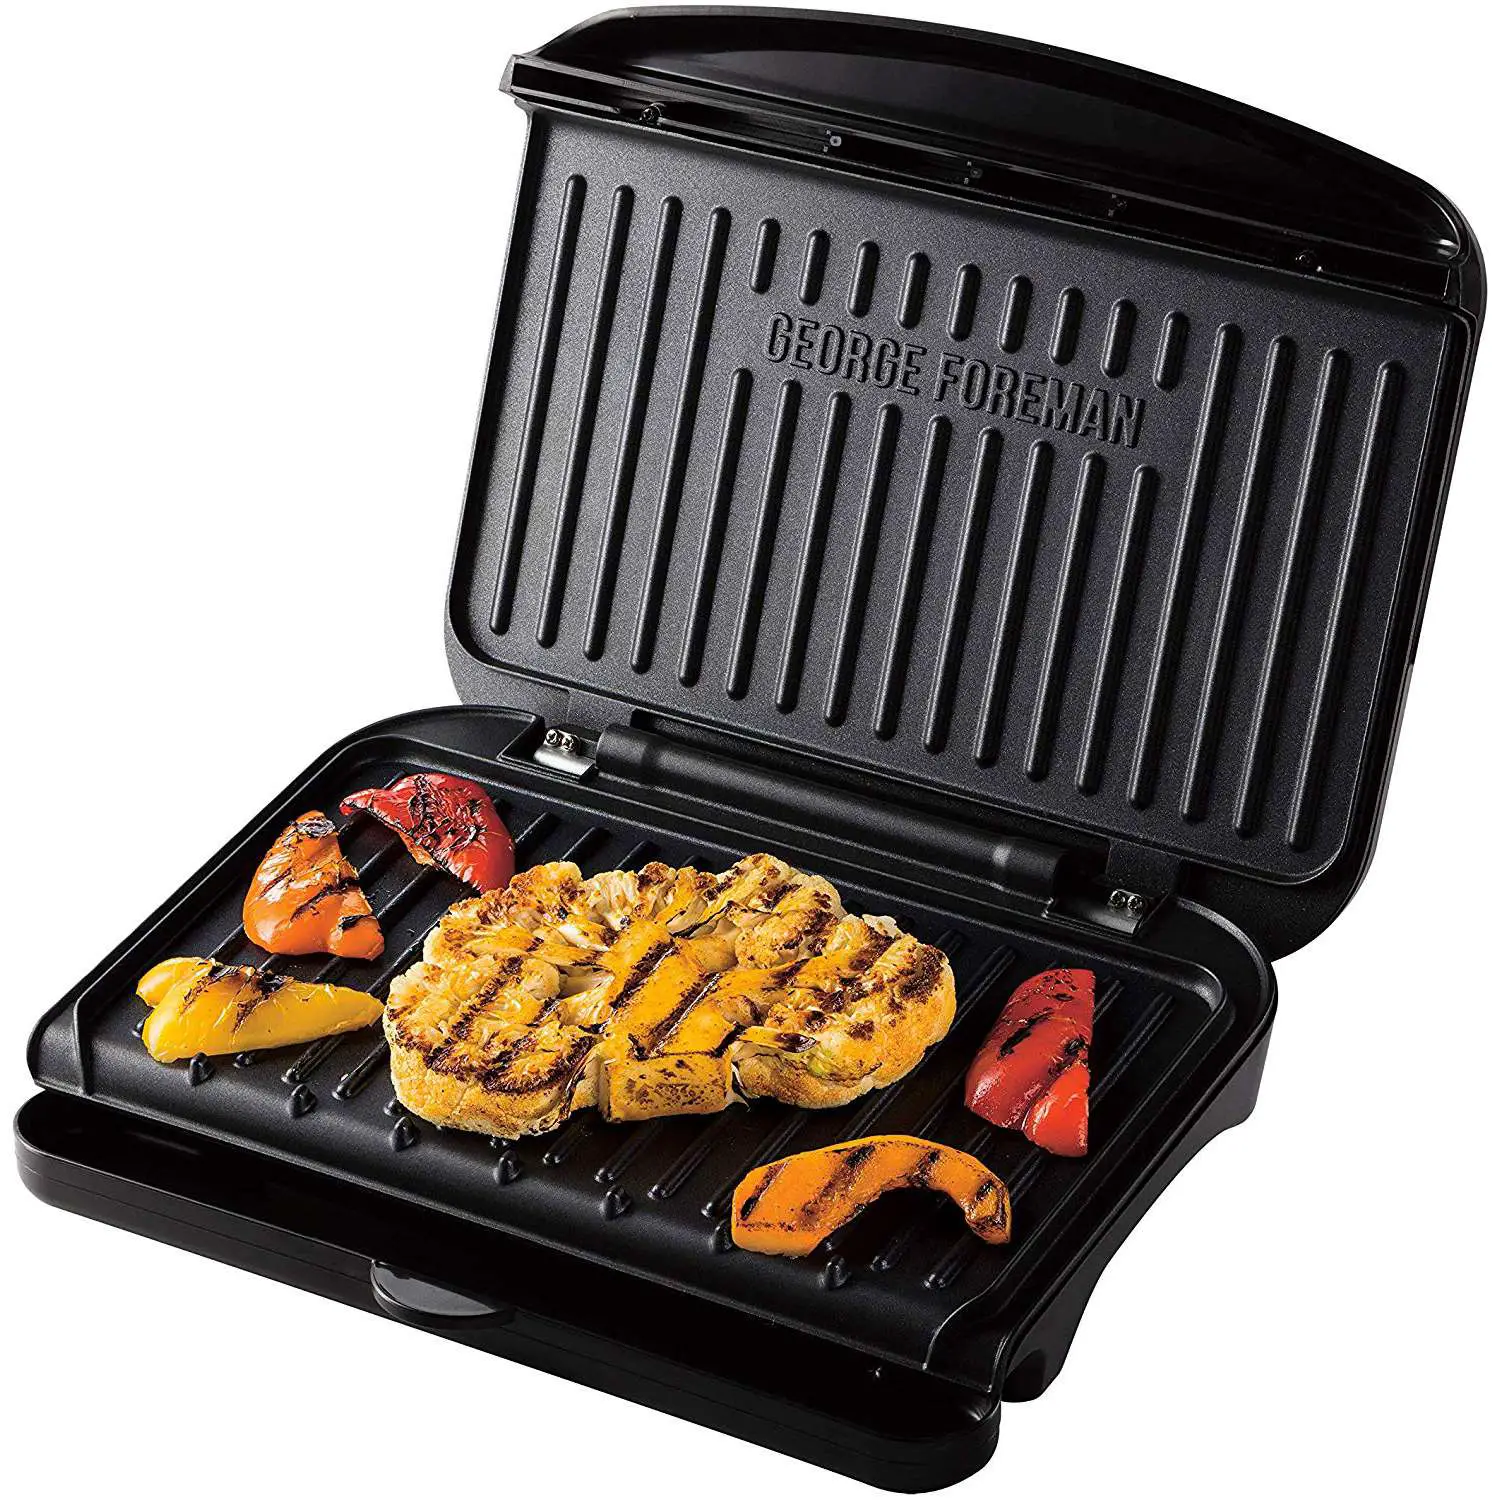 George foreman 25810 Grill